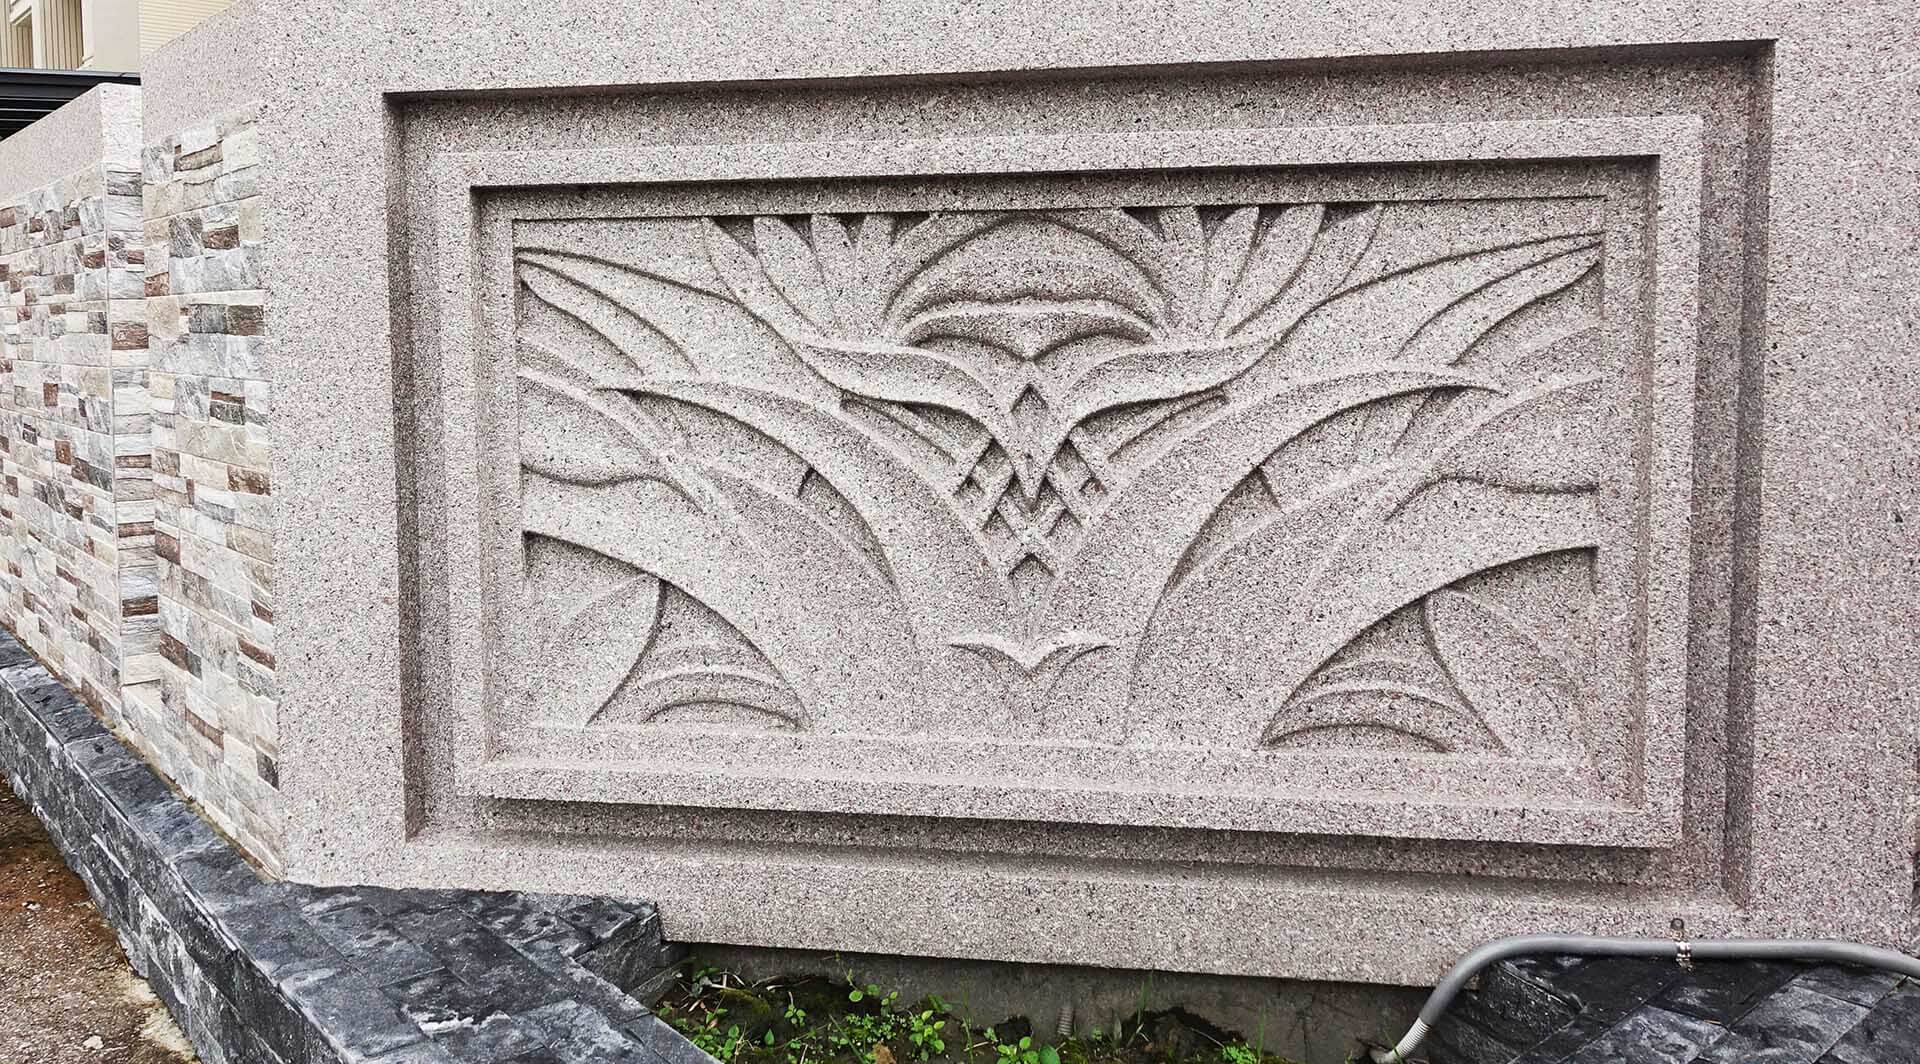 The outer wall of the house uses GRC plus ADD STONE Faux-Stone coating to create stone sculptures of granite sculptures.